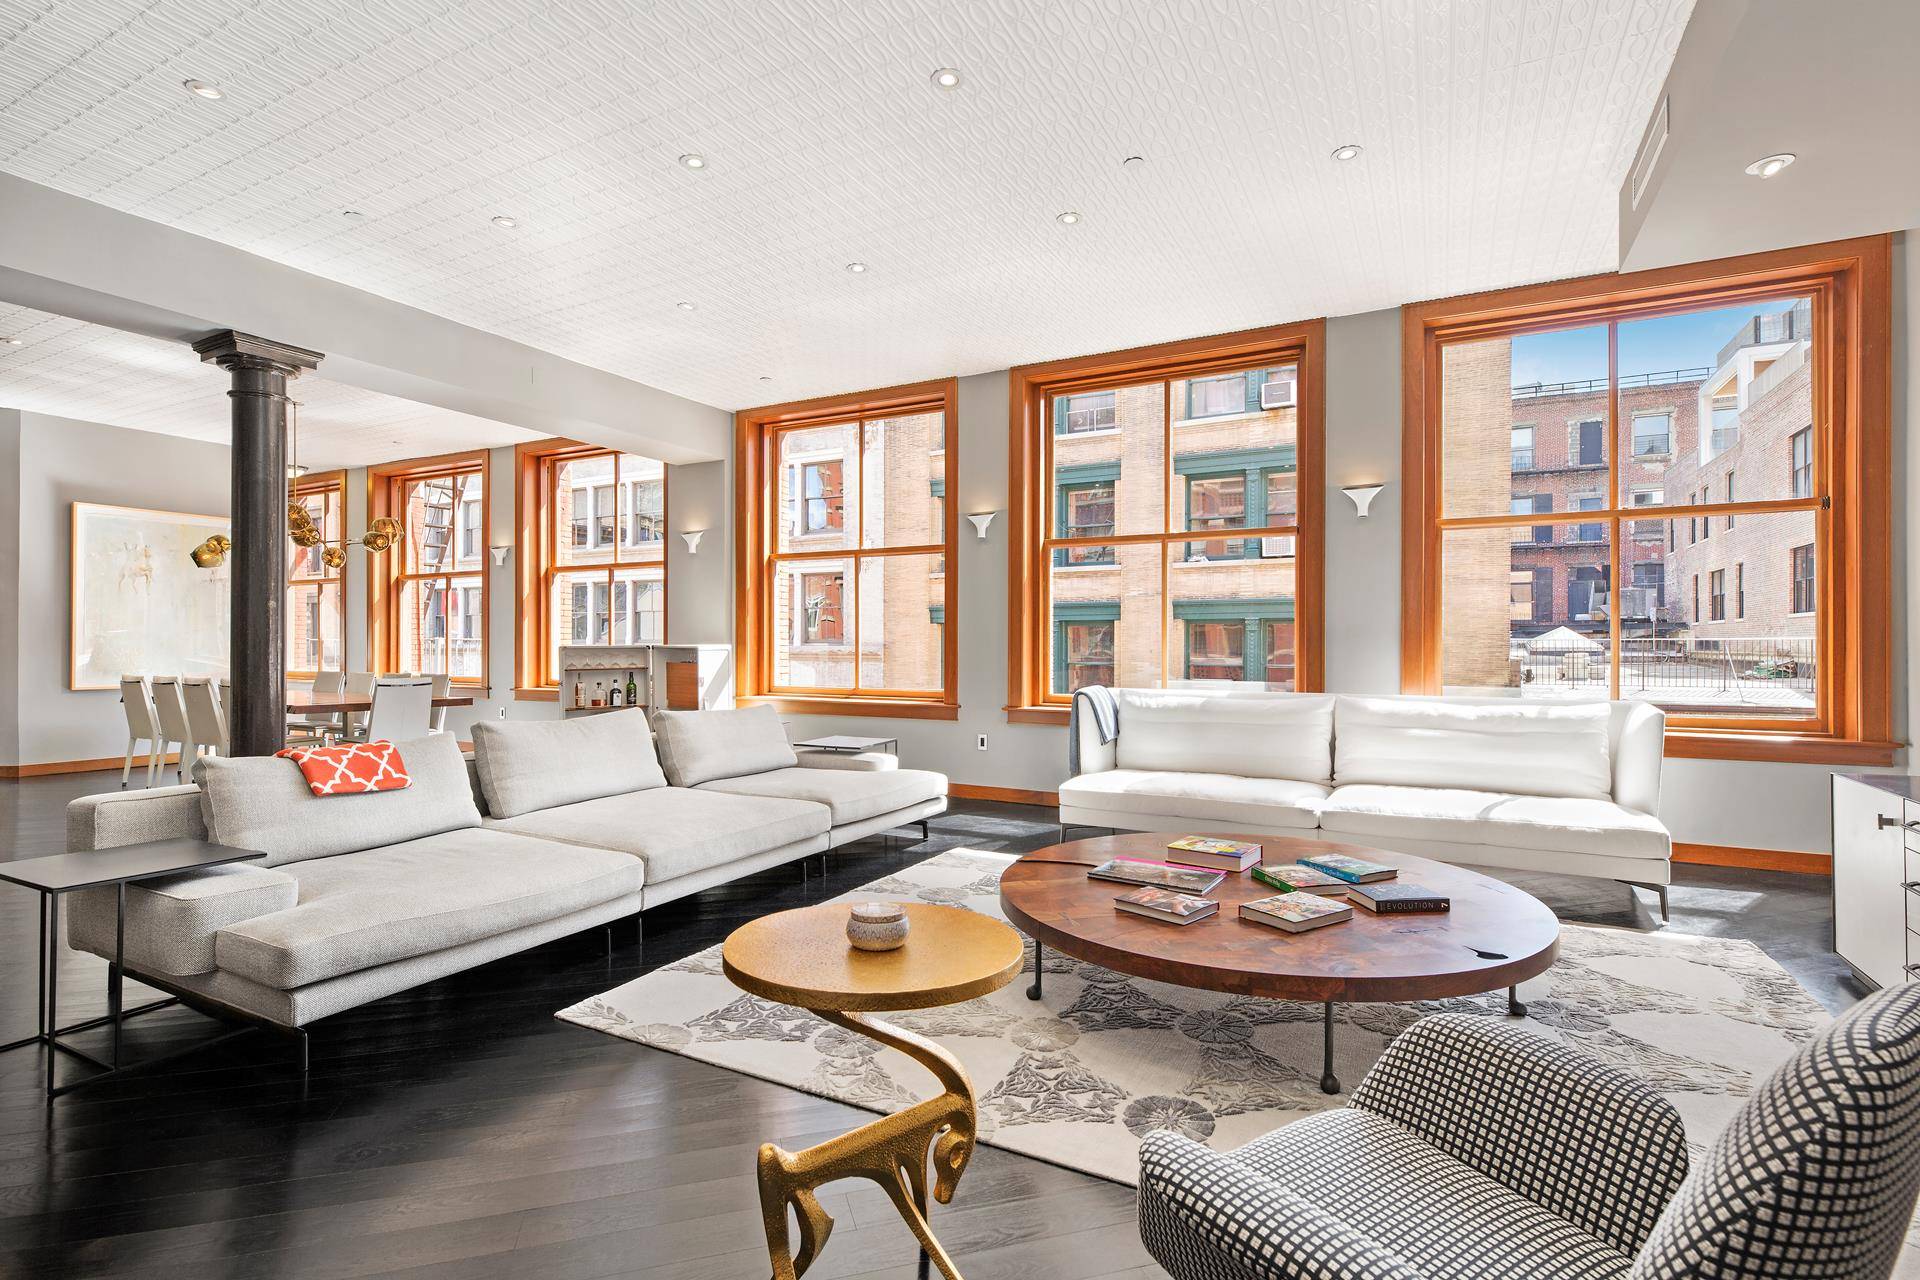 BRAND NEW ! SHOWING BY APPOINTMENTStunning, meticulously renovated, sunkissed 3, 600 SF LOFT in prime SoHo !